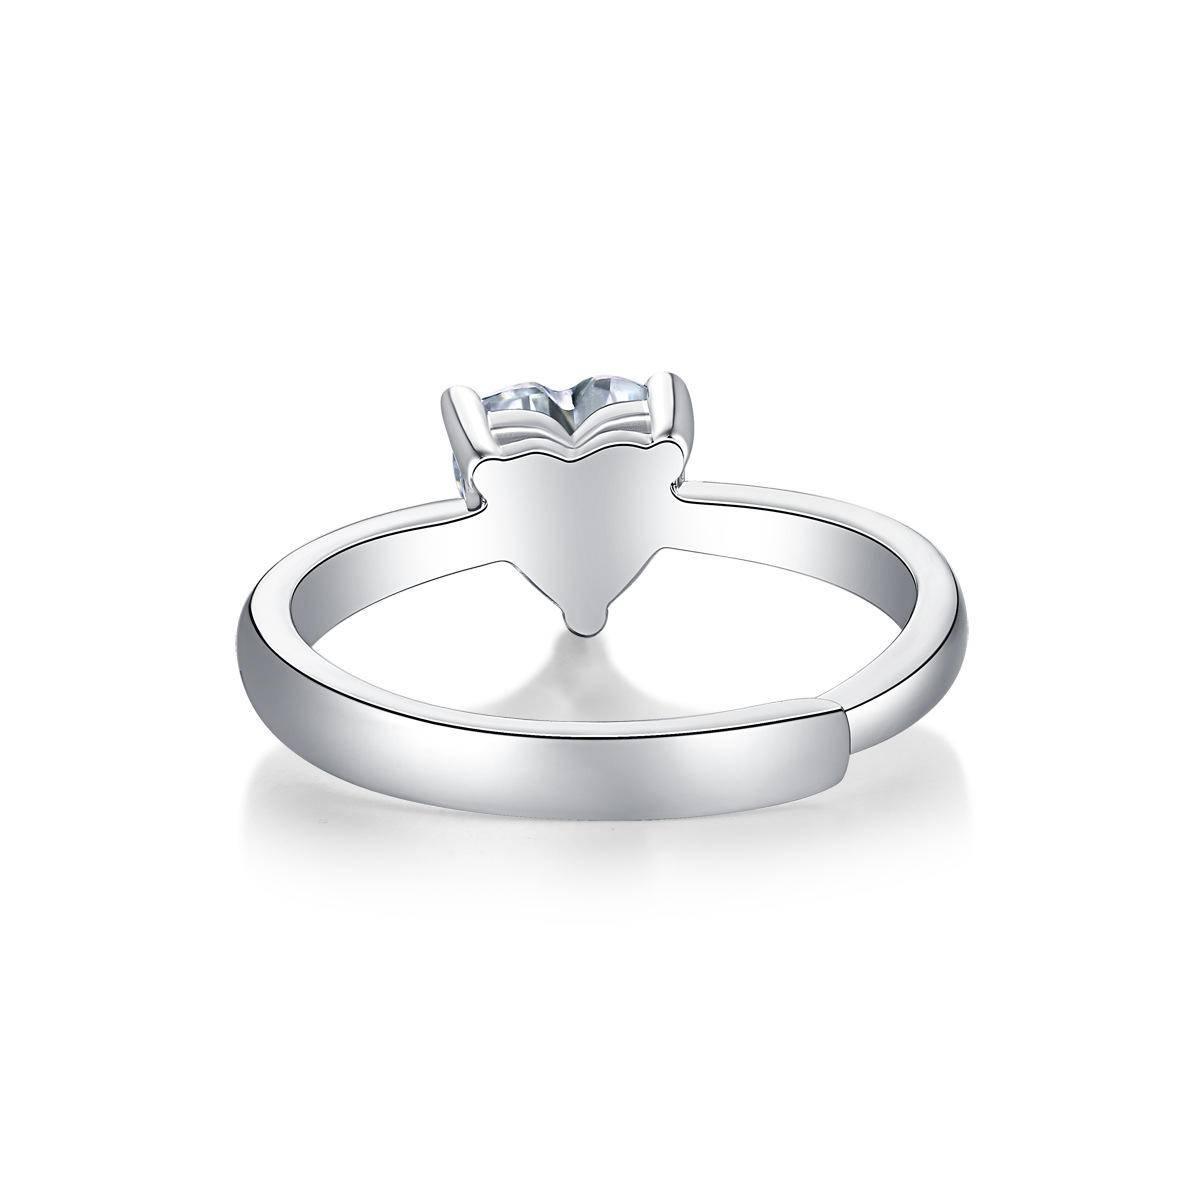 Get Your Heart Racing with Our Moissanite Adjustable Ring